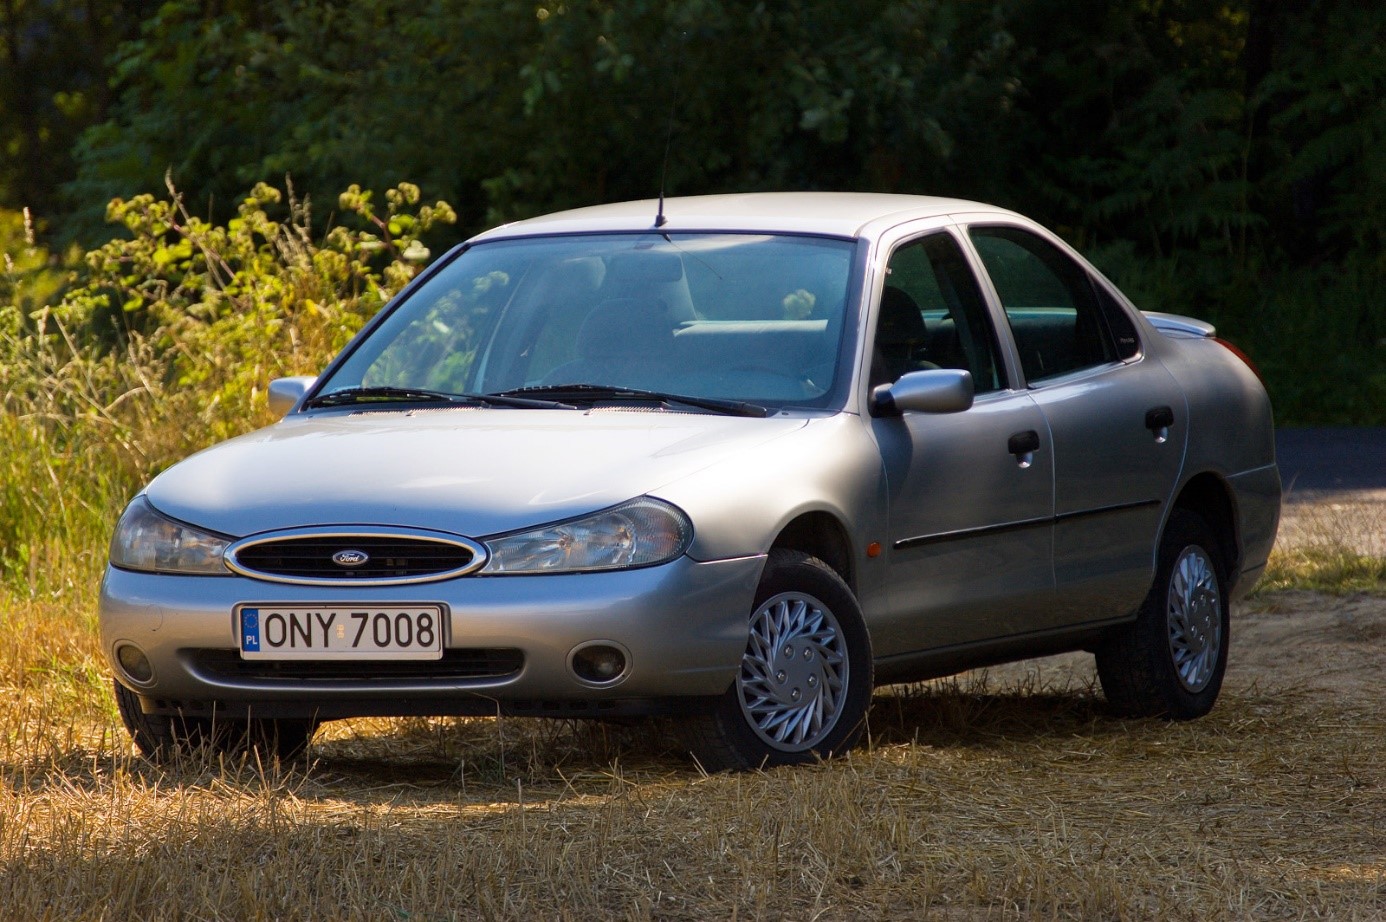 Ford Mondeo II 